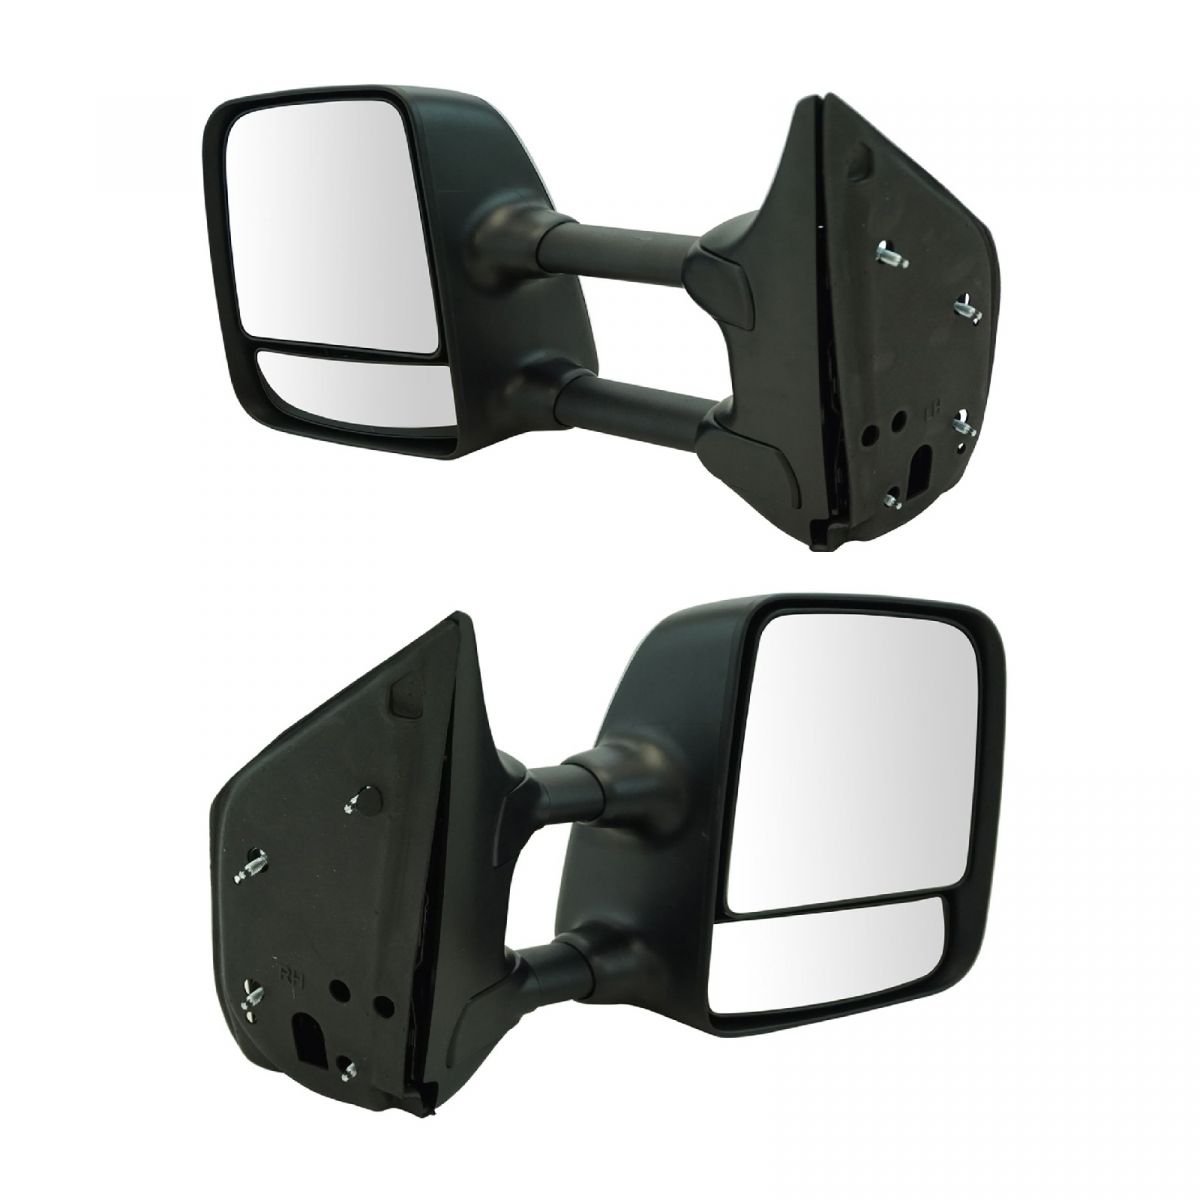 Towing Mirror Manual Chrome Pair Set of 2 for Nissan Titan New eBay